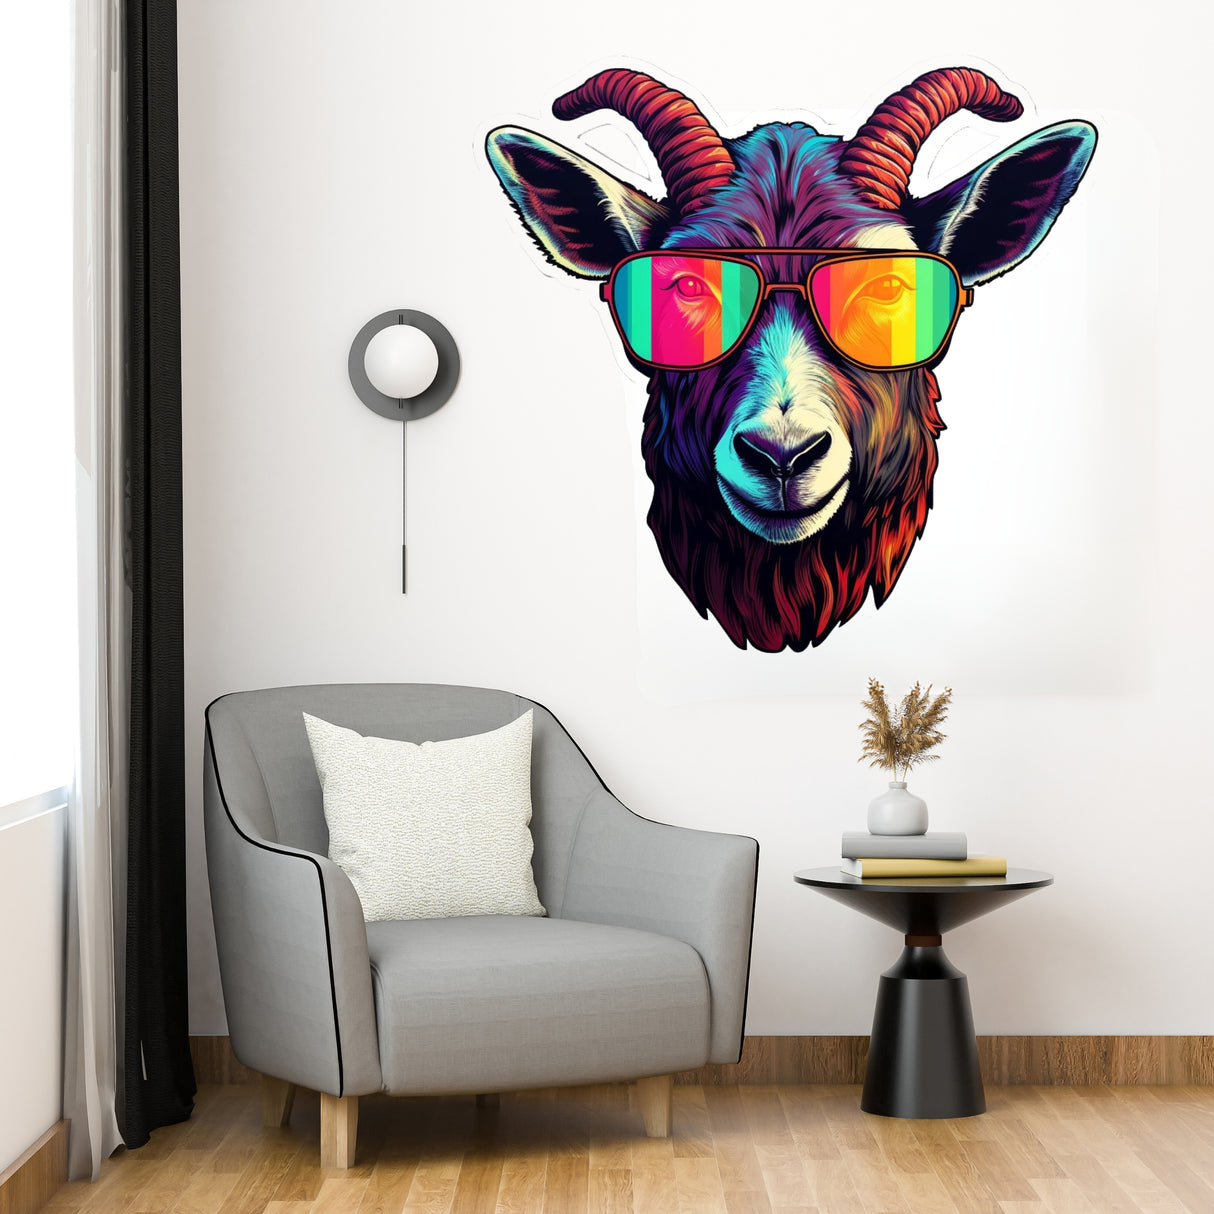 Avant-Garde Goat with Sunglasses Wall Decal